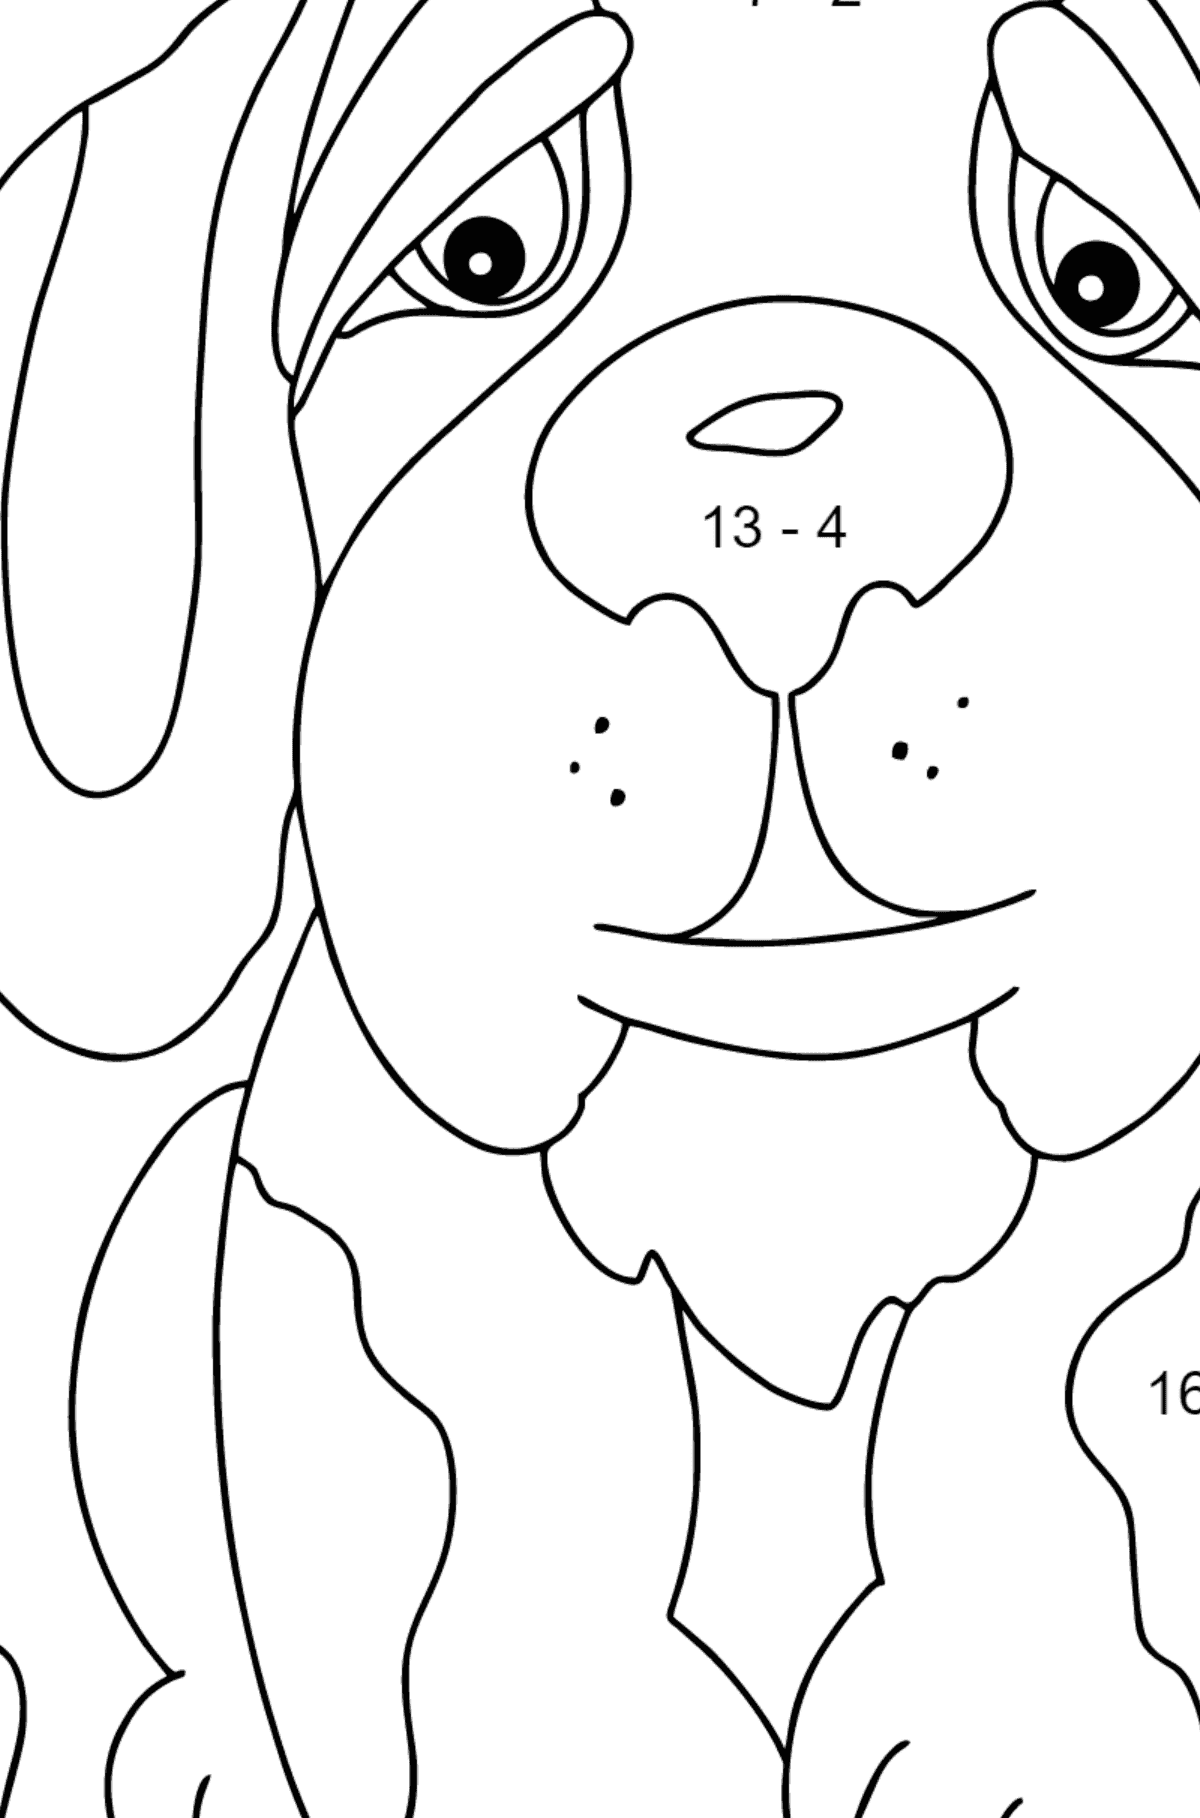 Coloring Page - A Dog is Looking Out a Butterfly for Children  - Color by Number Substraction